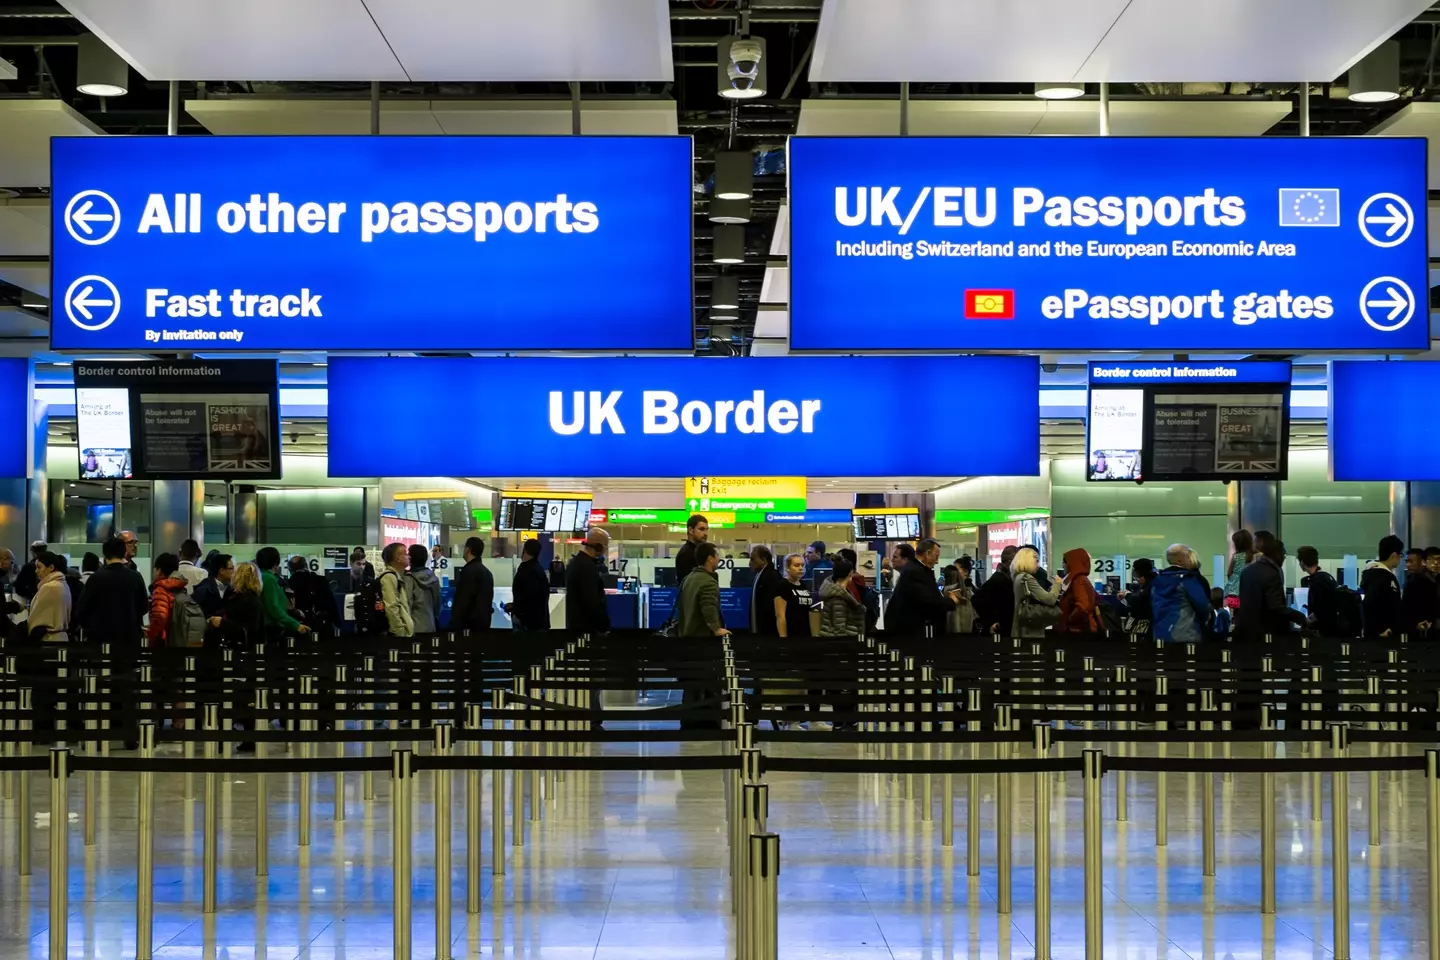 Strikes could mean 'huge' delays in passport applications.